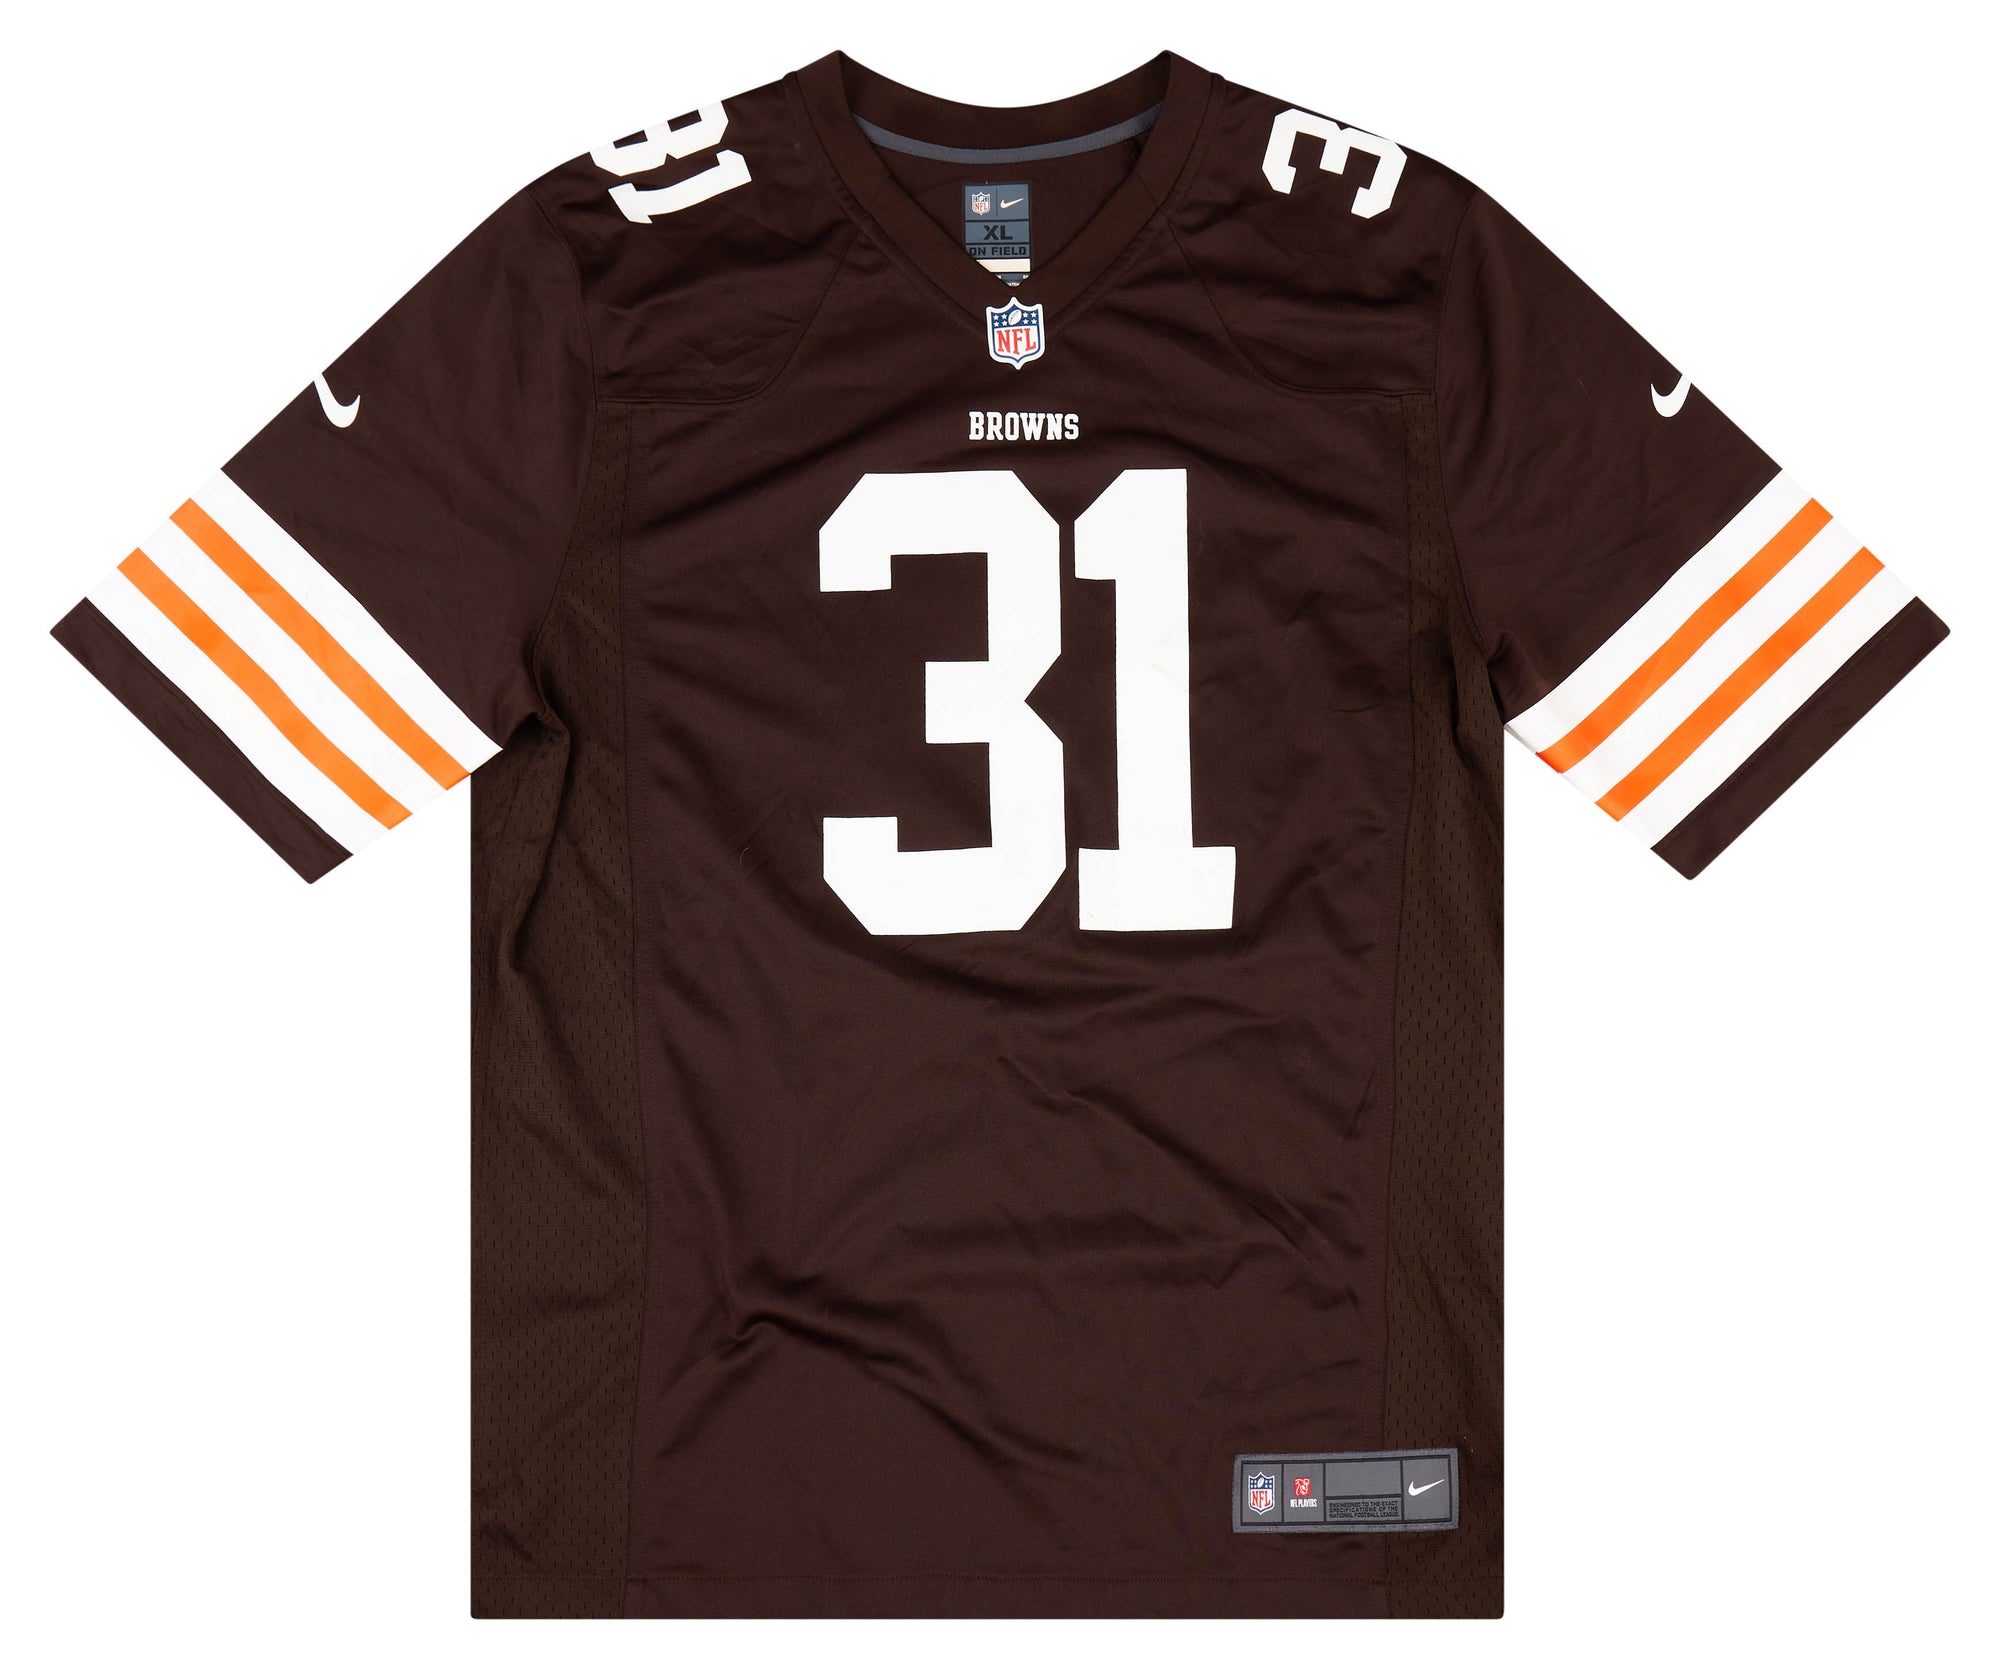 2014 CLEVELAND BROWNS WHITNER #31 NIKE GAME JERSEY (HOME) XL